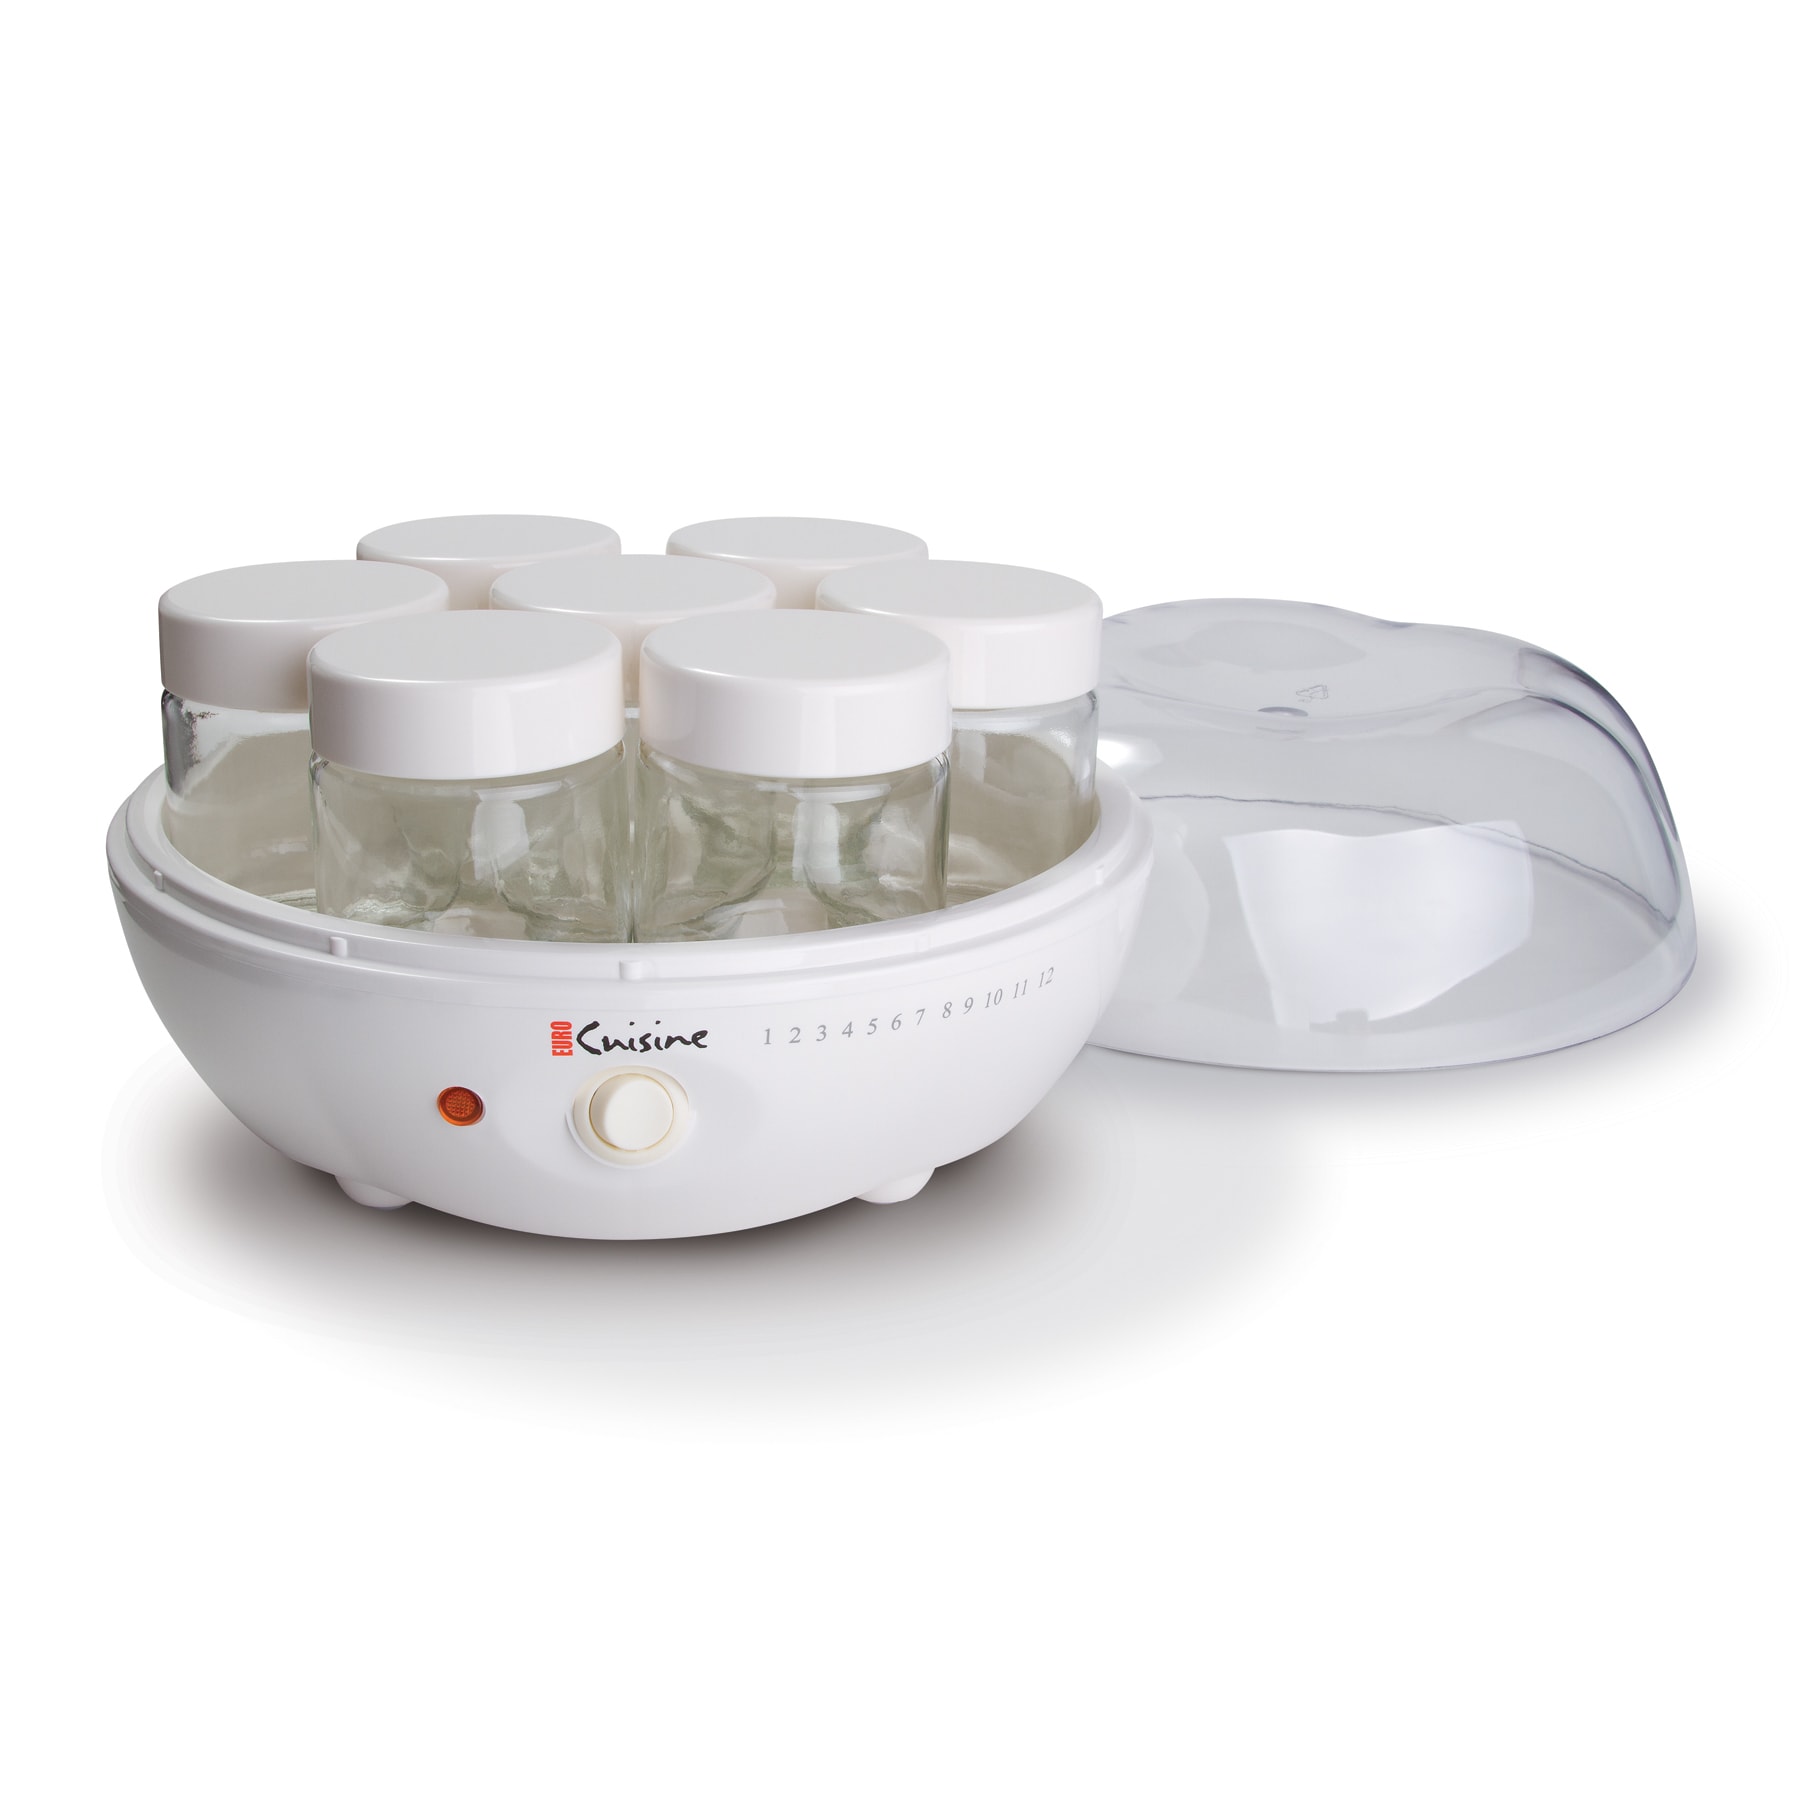 Euro-Cuisine Yogurt Maker with Thermometer - On Sale - Bed Bath